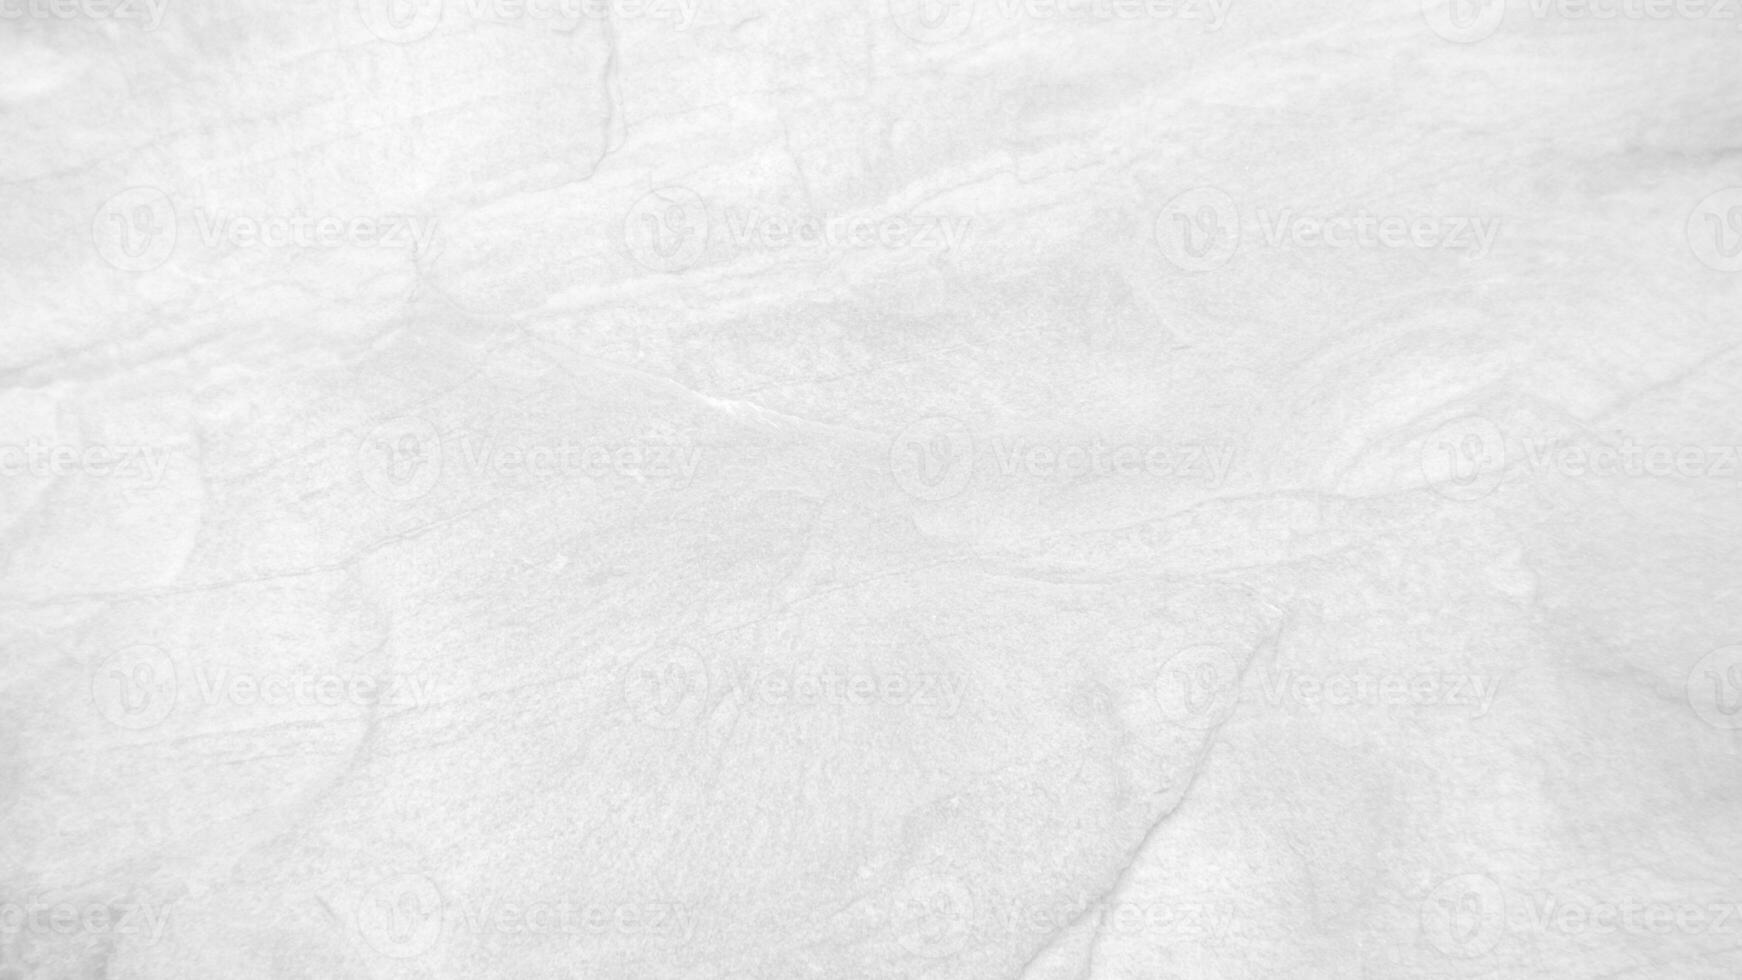 Surface of the White stone texture rough, gray-white tone. Use this for wallpaper or background image. There is a blank space for text.. photo